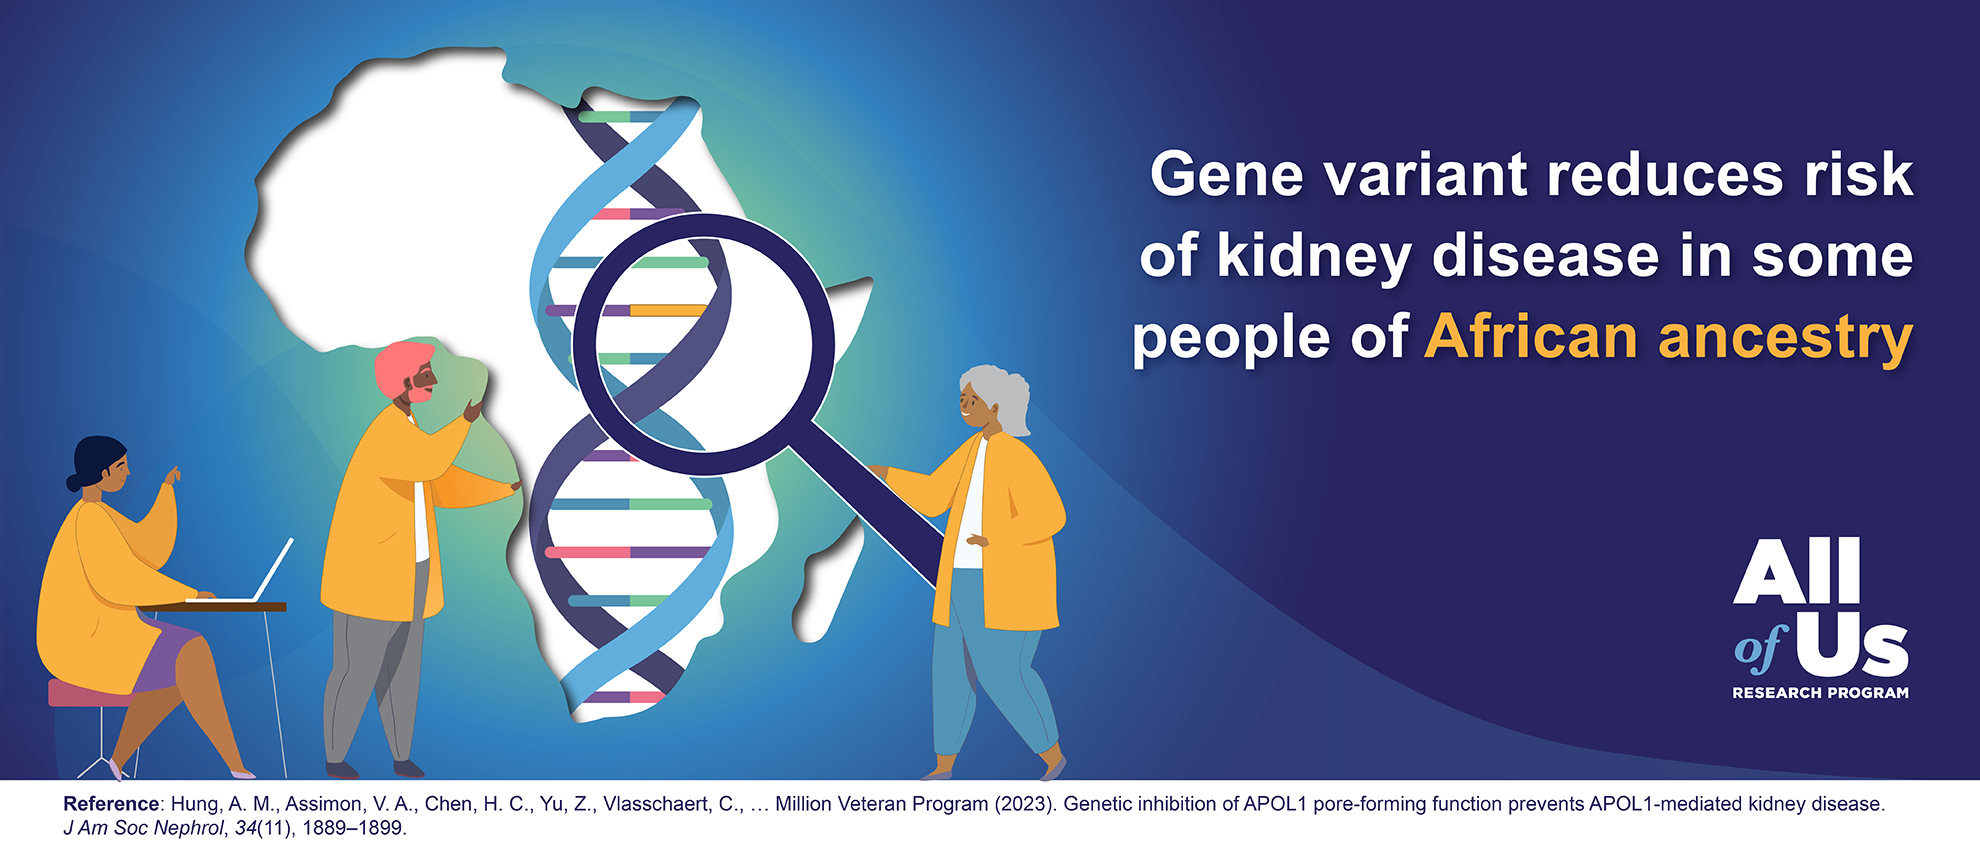 Gene variant reduces risk of kidney disease in some people of African ancestry.  All of Us Research Program. Silhouette of Africa with a DNA strand in the middle, and a person holding a magnifying glass up to the DNA strand. Another person is on a computer, and a third person is looking at the DNA strand.